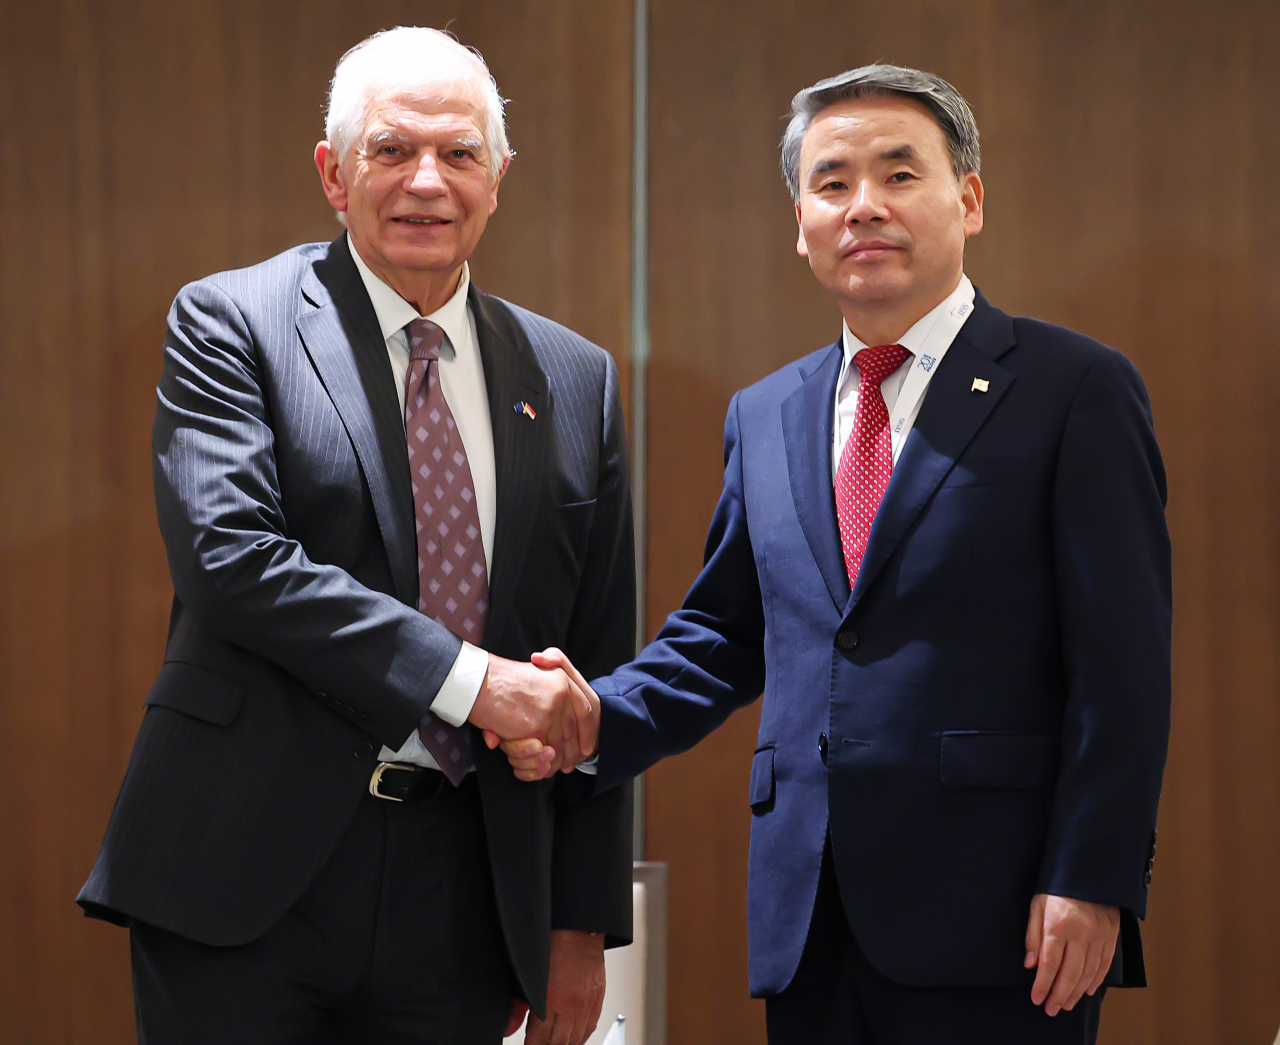 Defense Minister Lee Jong-sup (right) shakes hands with Josep Borrell, high representative of the European Union for foreign affairs and security policy, as they meet at the Shangri-La Dialogue in Singapore on Saturday. (Yonhap)